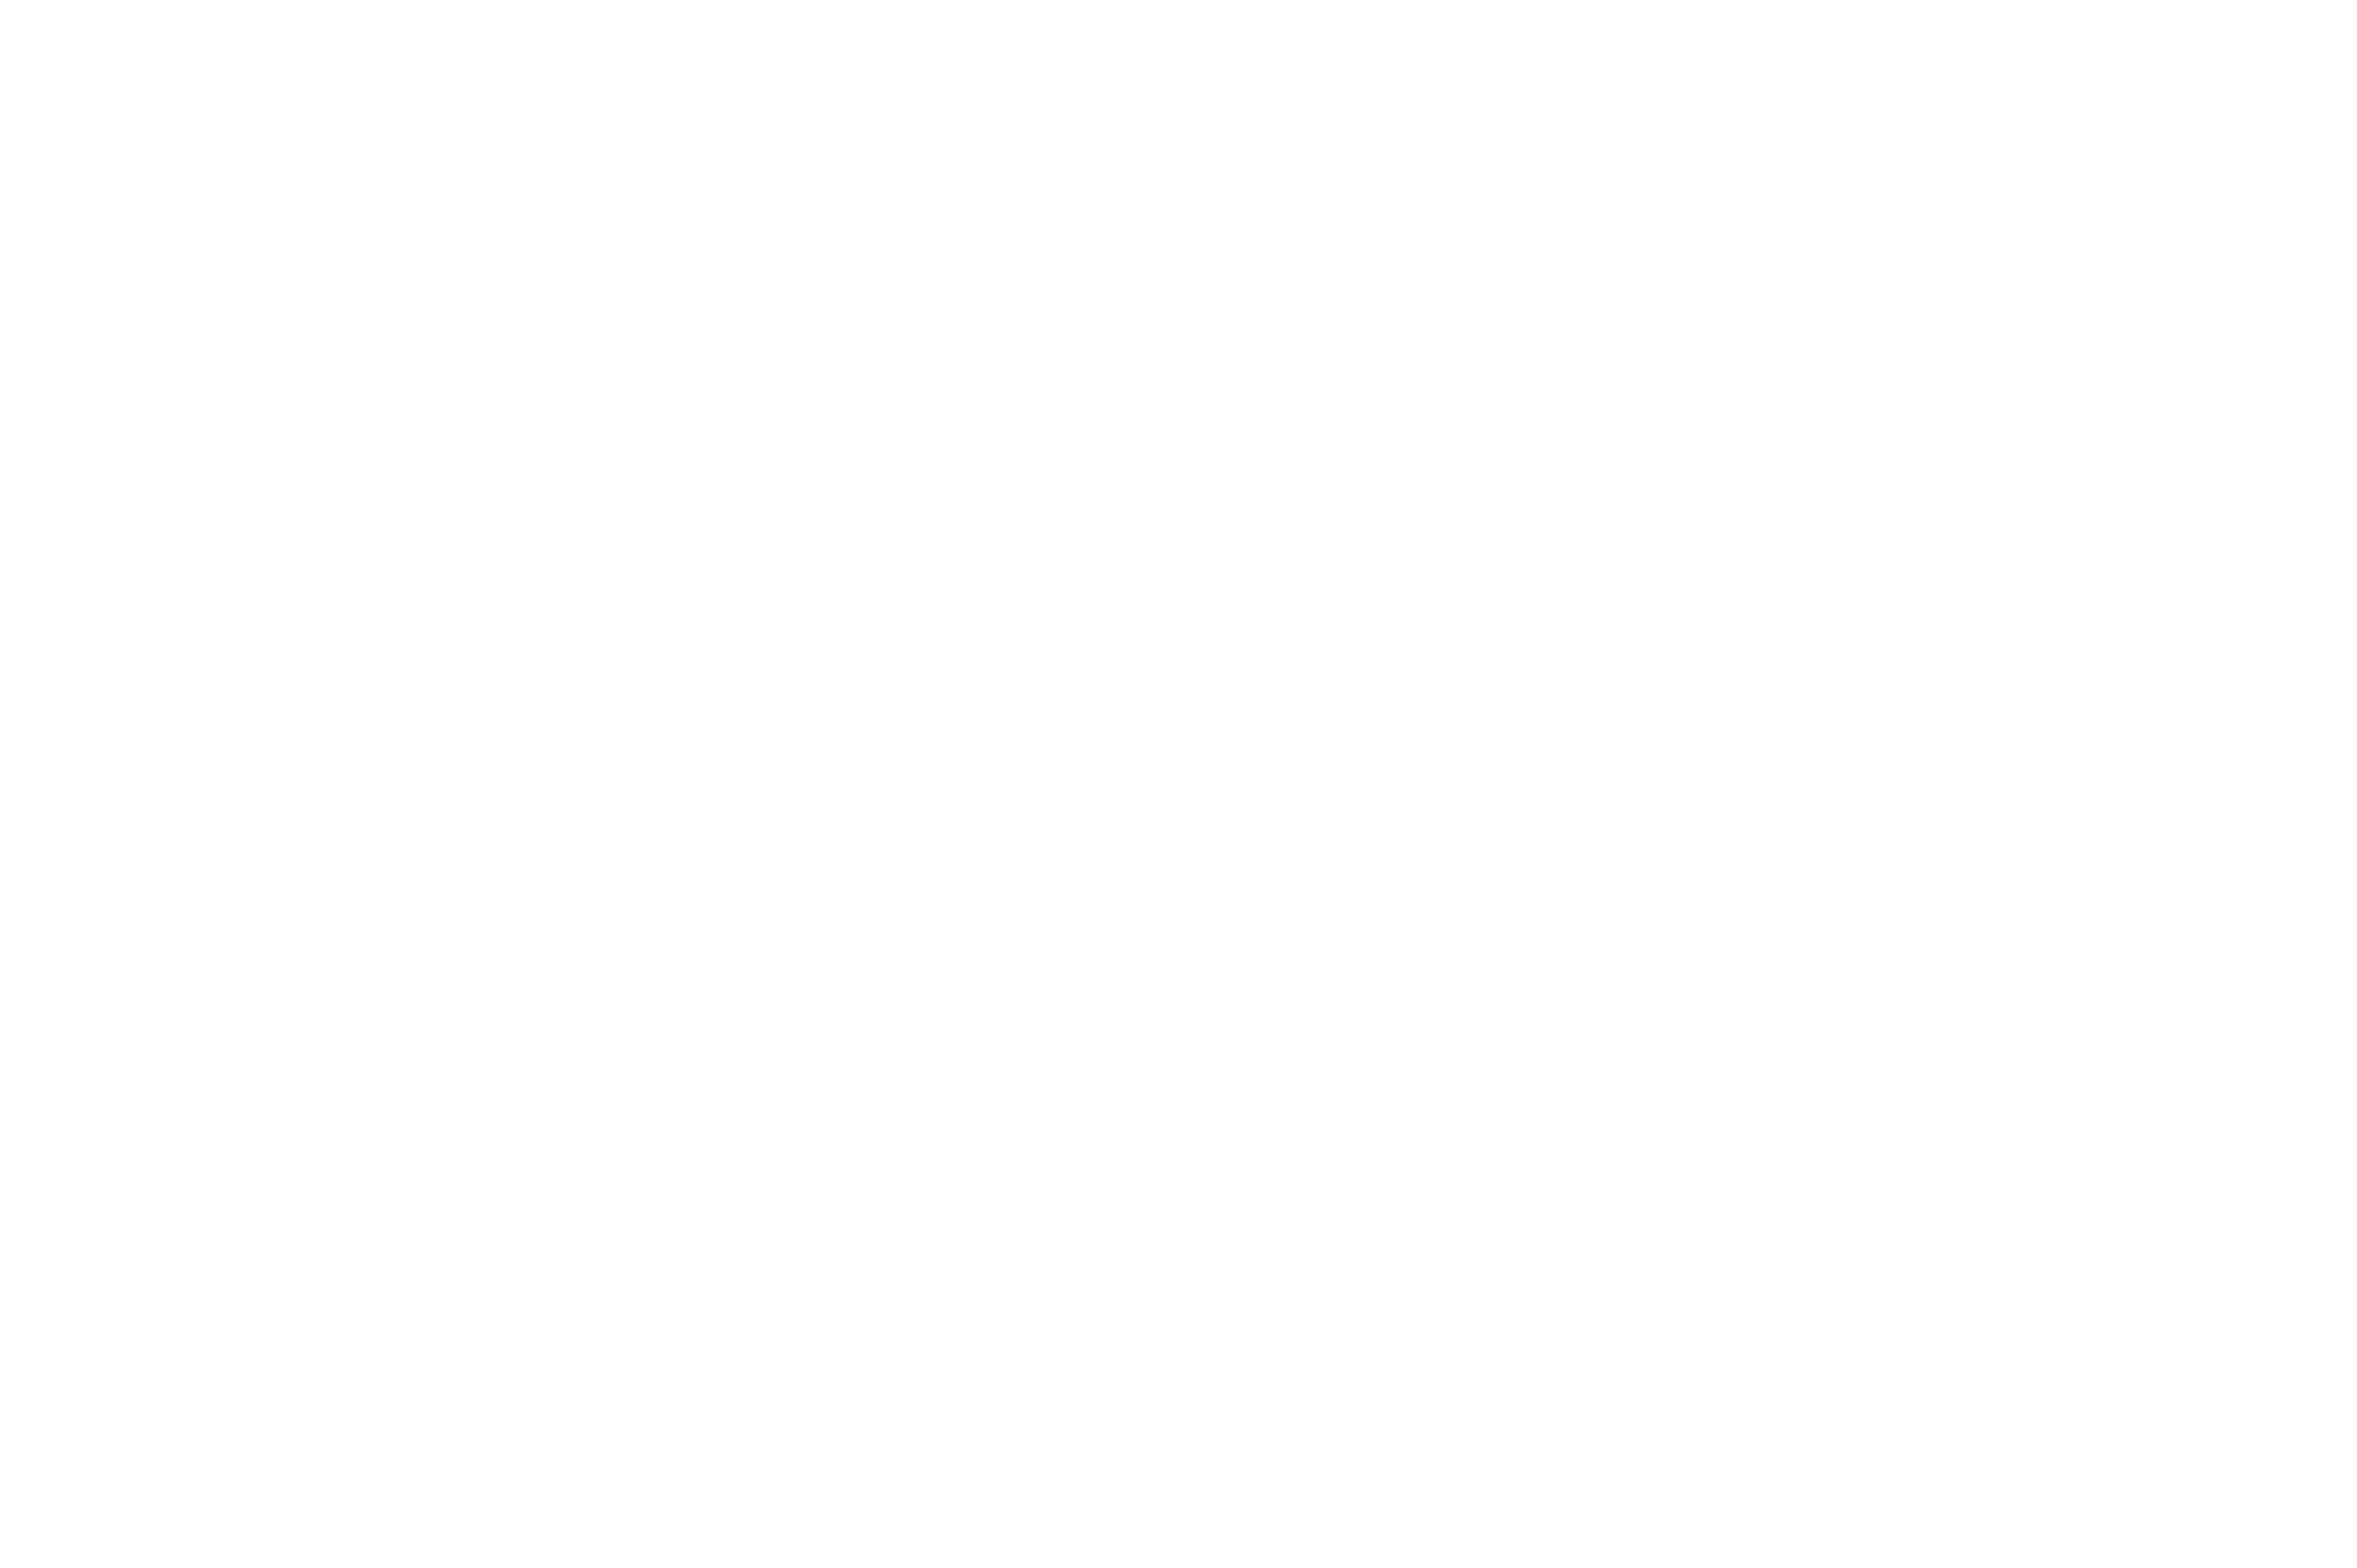 LET THE GAMES BEGIN by MIKE SMITH AND STEVE TITFORD